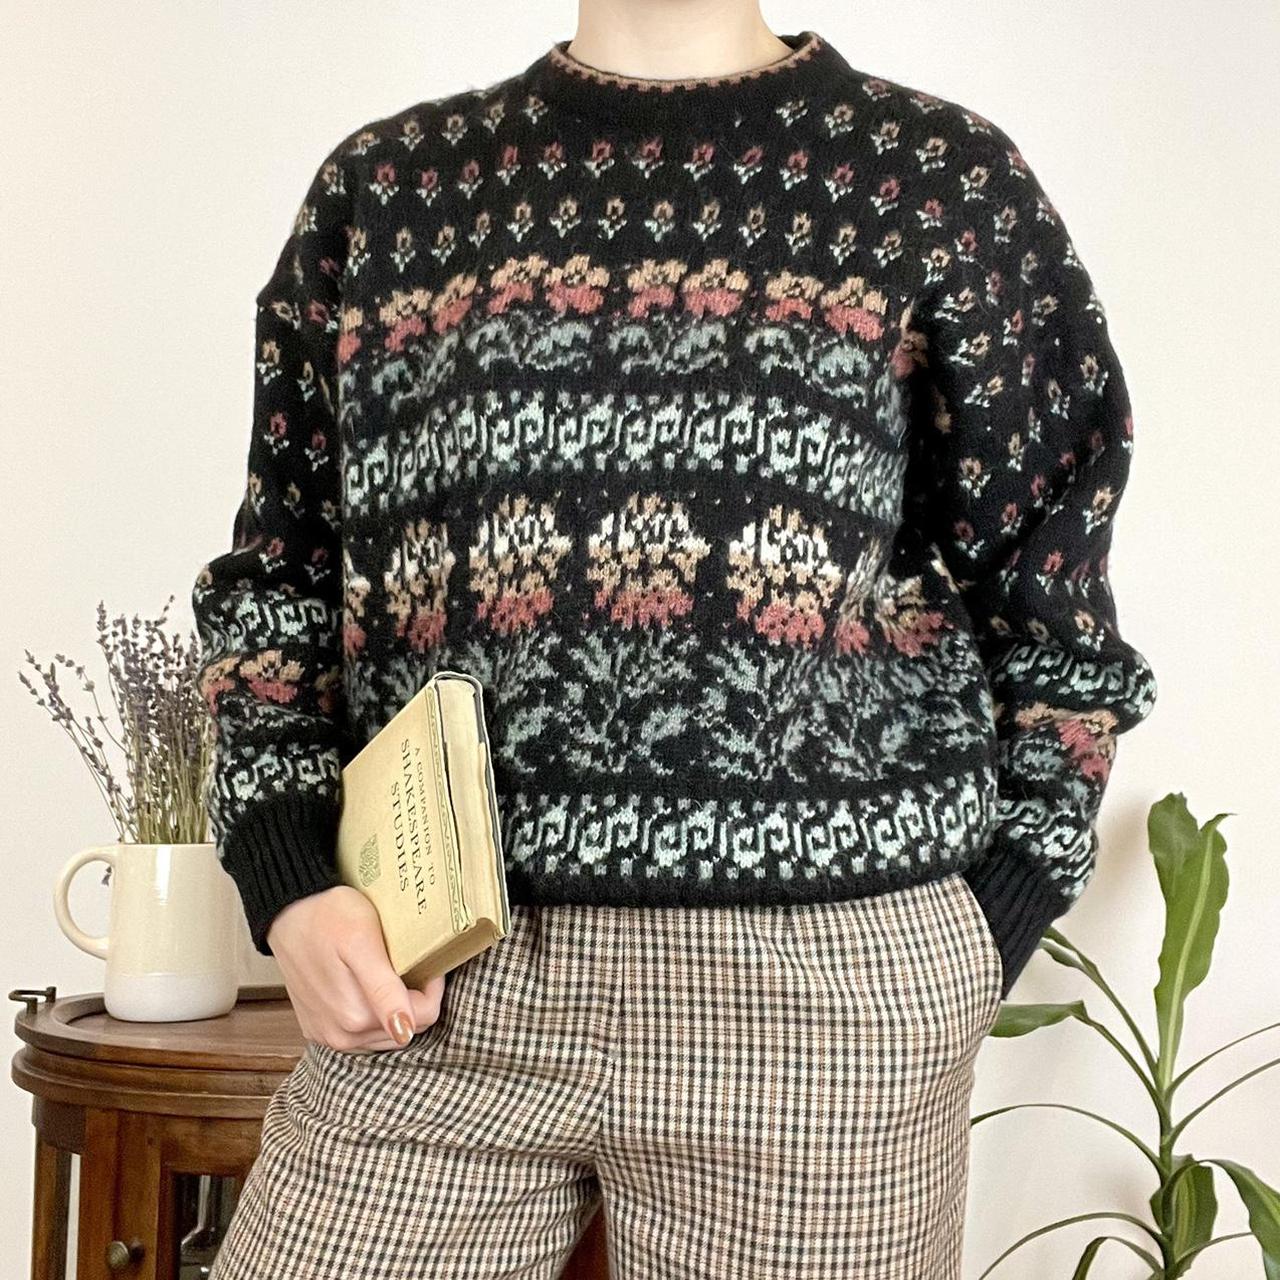 Cosy knit vintage jumper by The Clever Shepherd,... - Depop